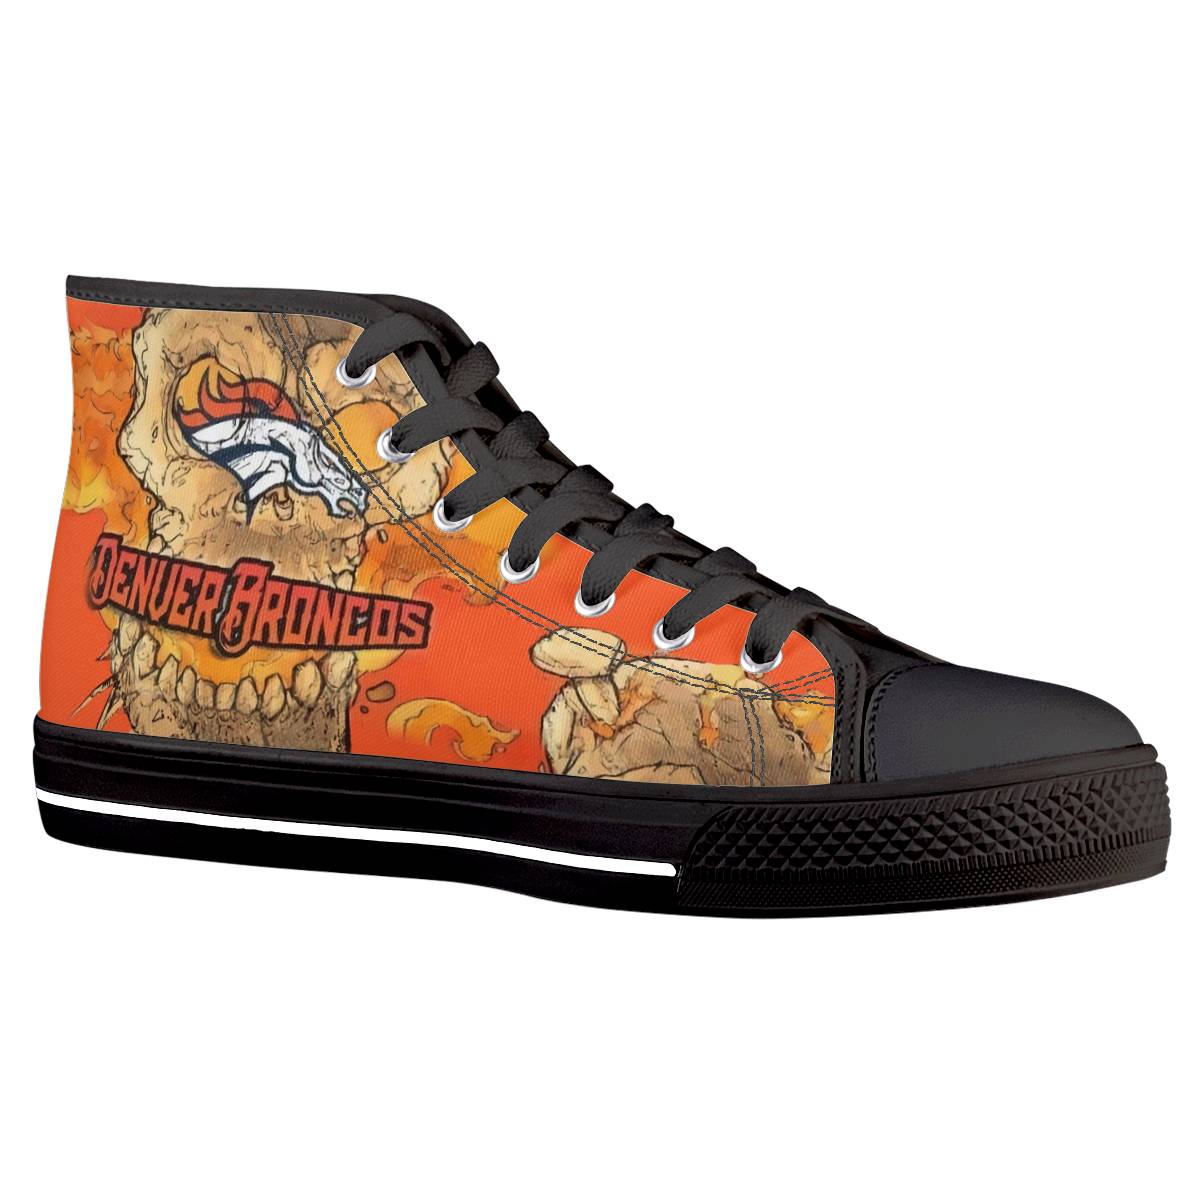 Men's Cleveland Browns High Top Canvas Sneakers 005